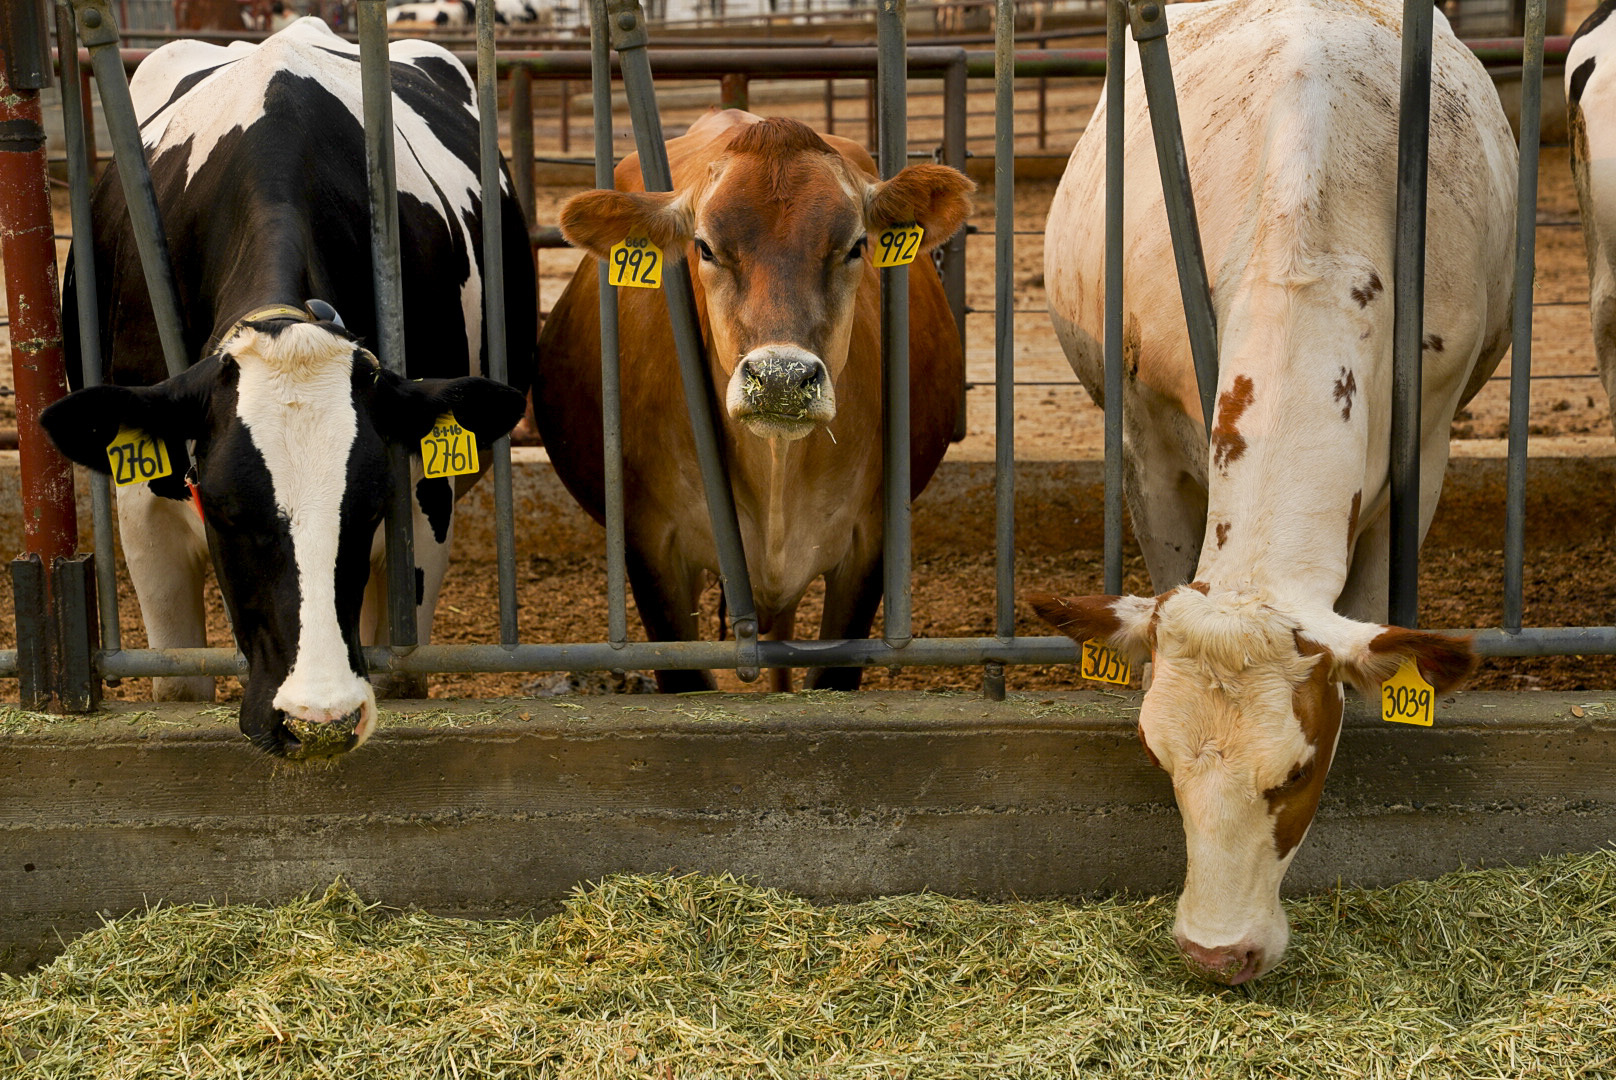 three dairy cows in feed stall eating